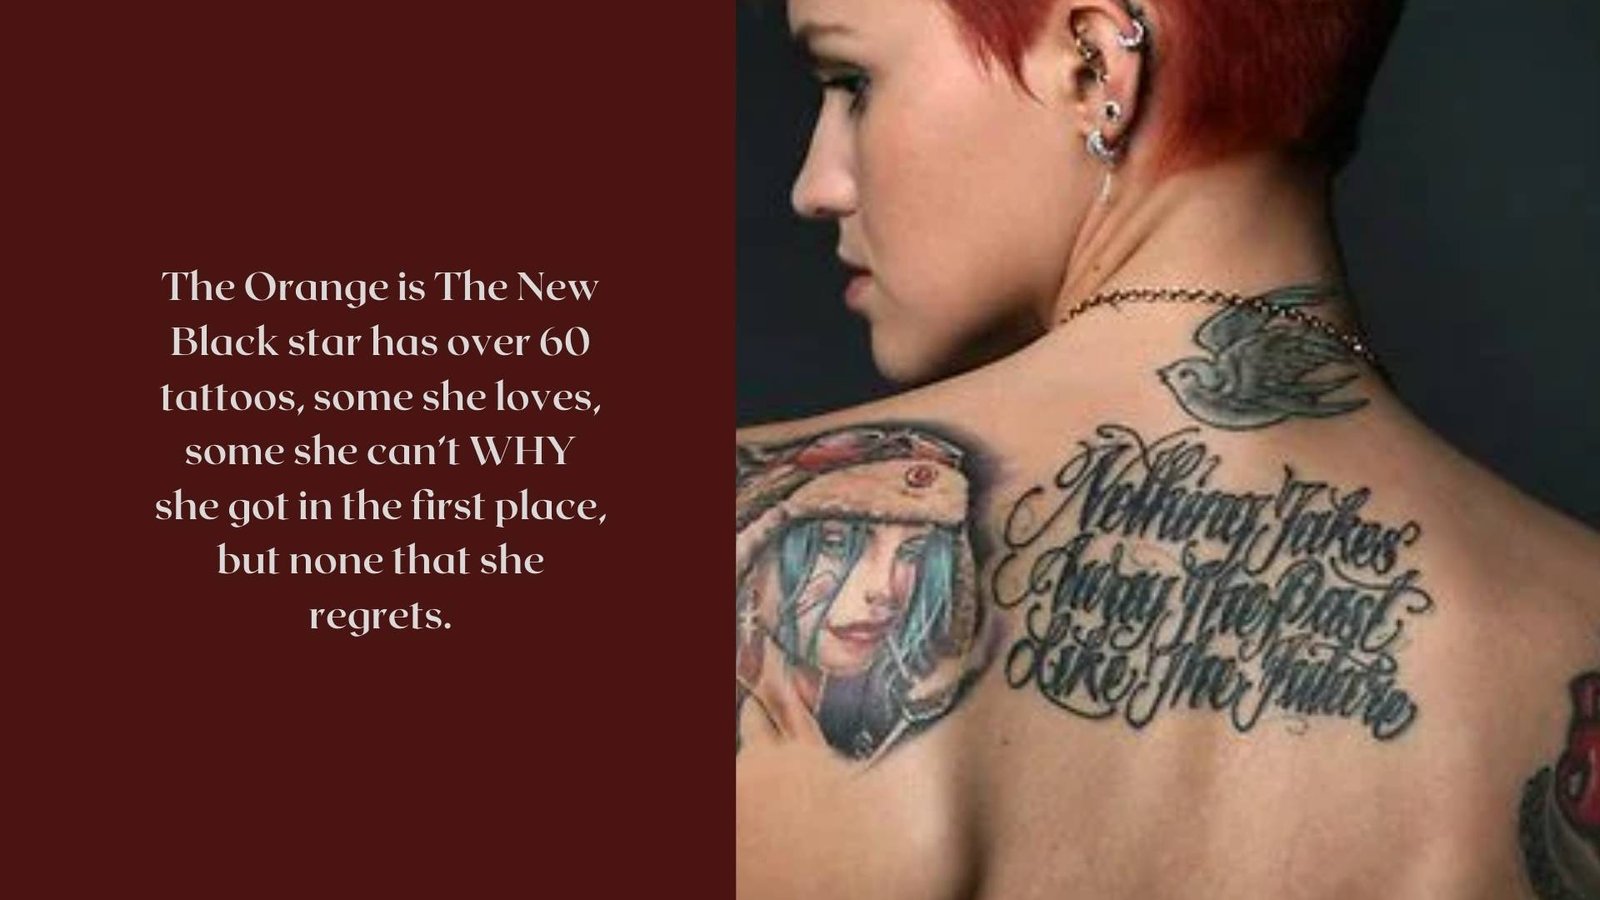 Ruby Rose’s Tattoos & Their Meanings